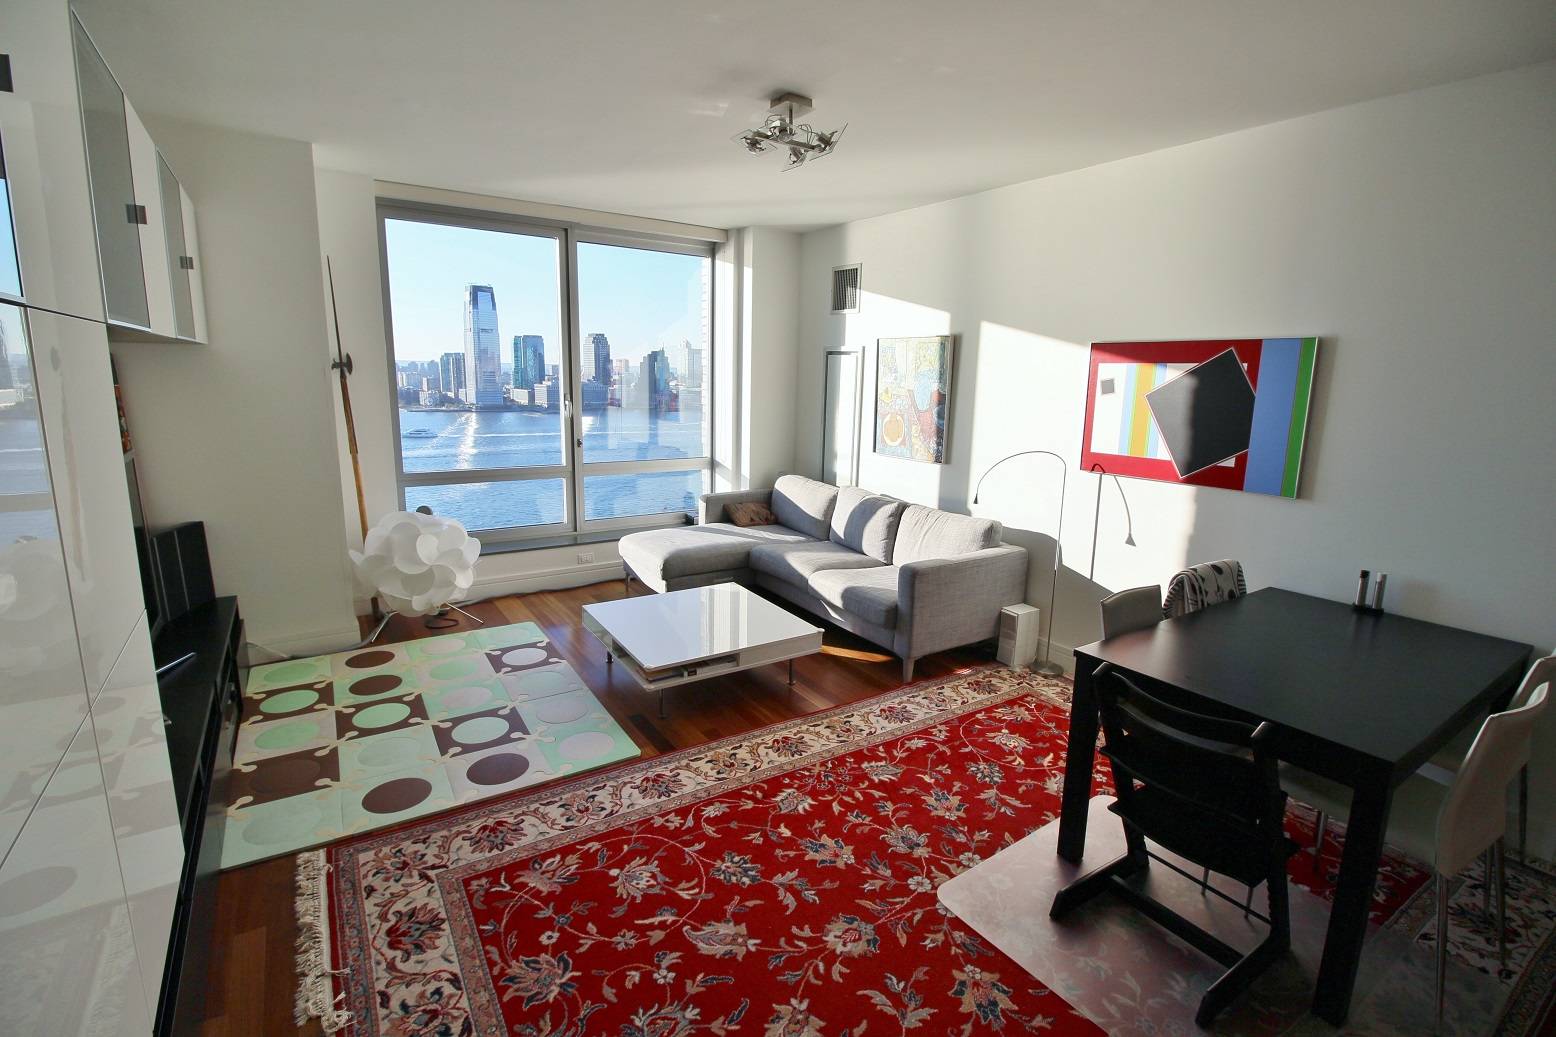 Views! Views! Views! 2bed/2bath W/ SPECTACULAR RIVER & STATUE OF LIBERTY VIEWS in Battery Park City!!